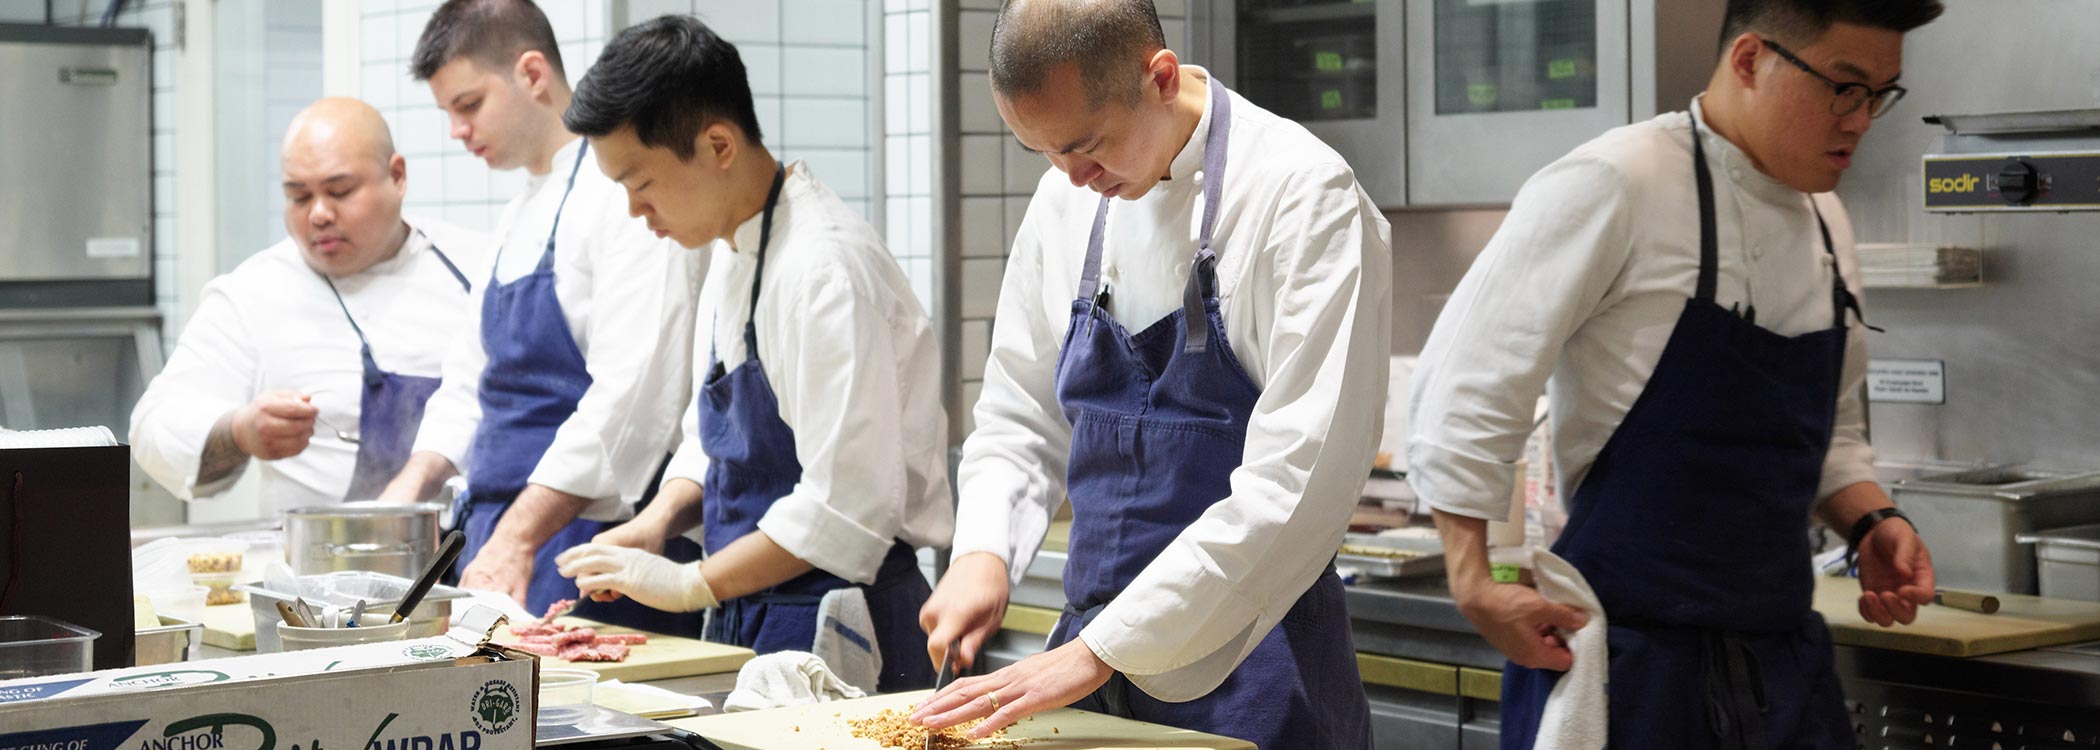 Why do chefs have a big ego at work?